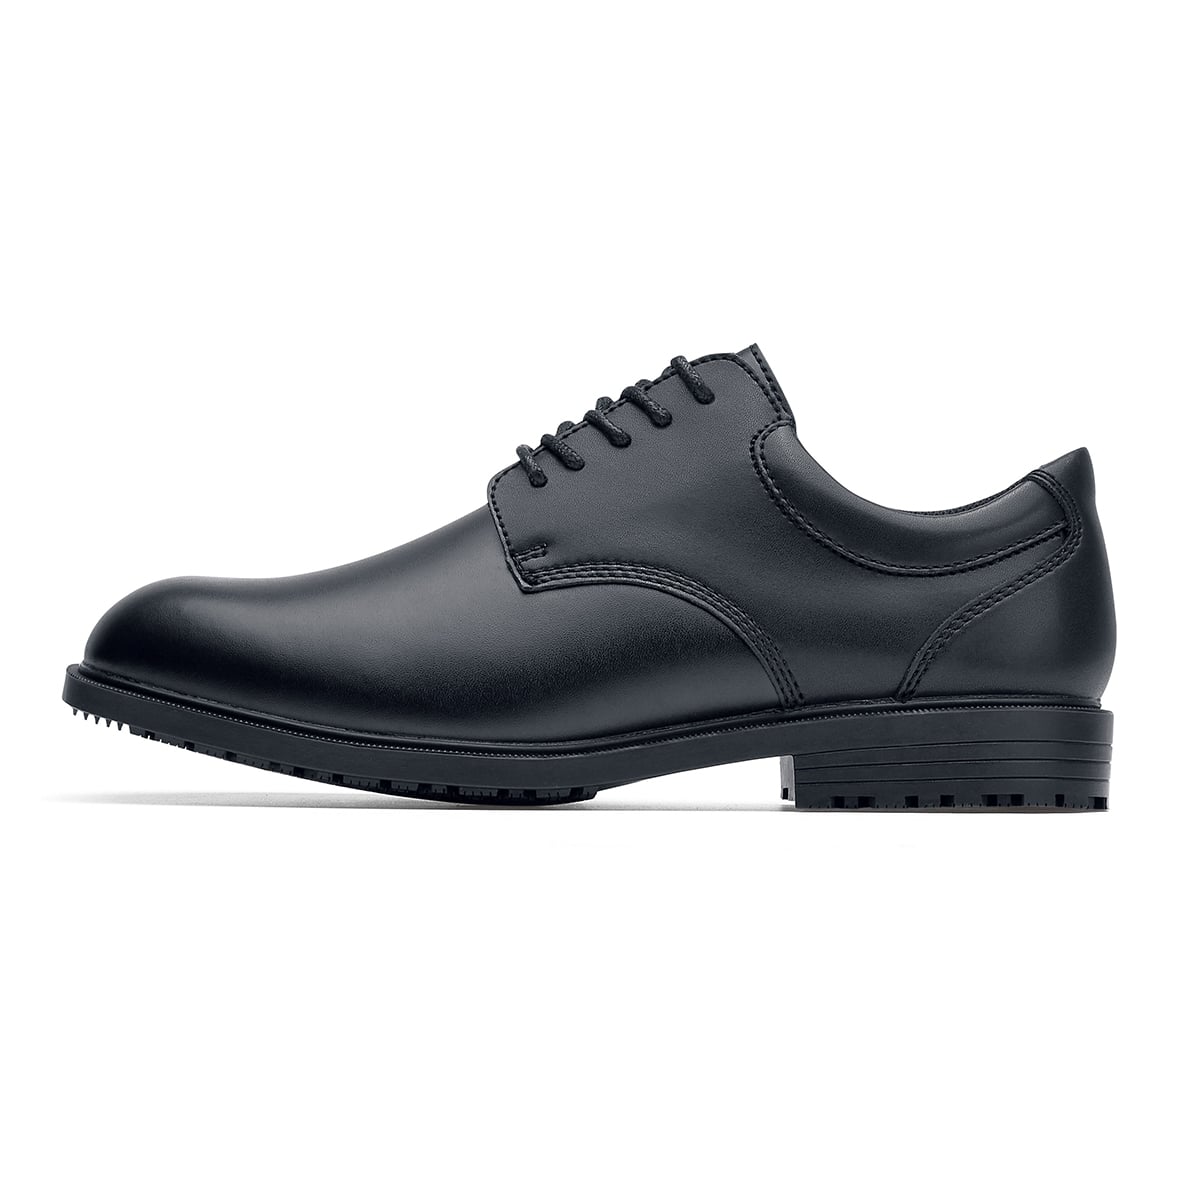 The Shoes for Crews Cambridge III is a slip-resistant leather dress shoe, with removable cushioned insoles and a padded comfort collar, seen from the left.